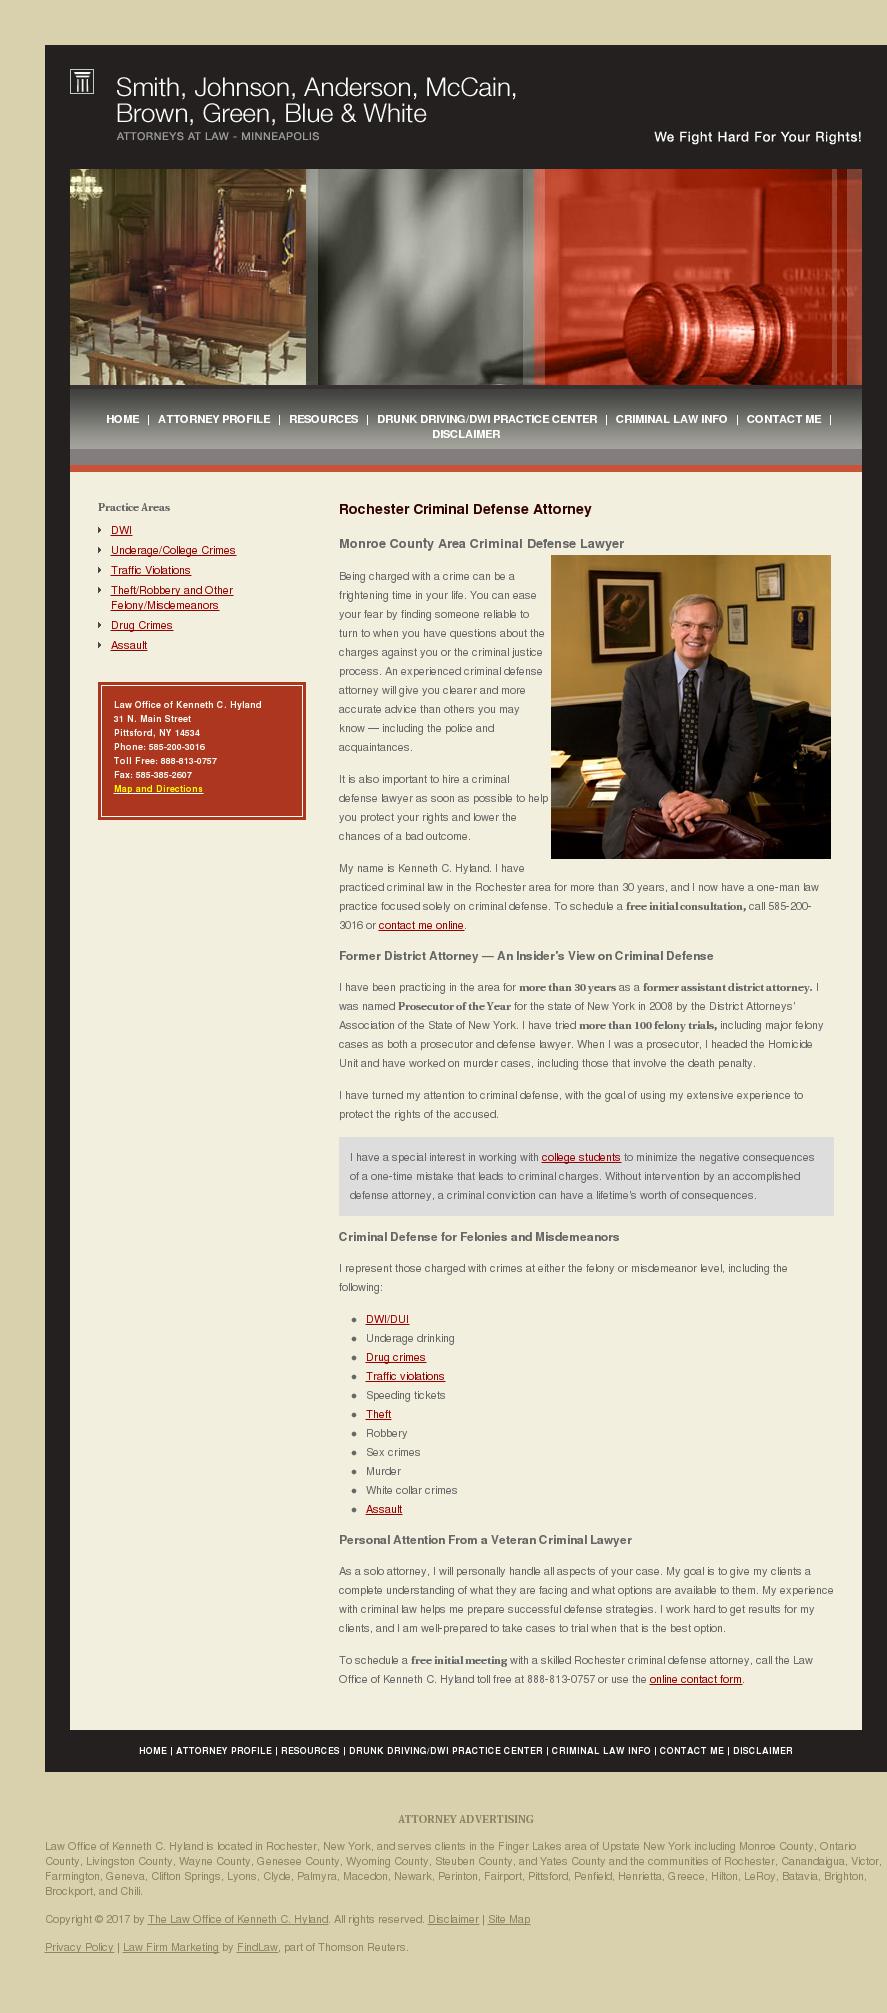 The Law Office of Kenneth C. Hyland - Pittsford NY Lawyers